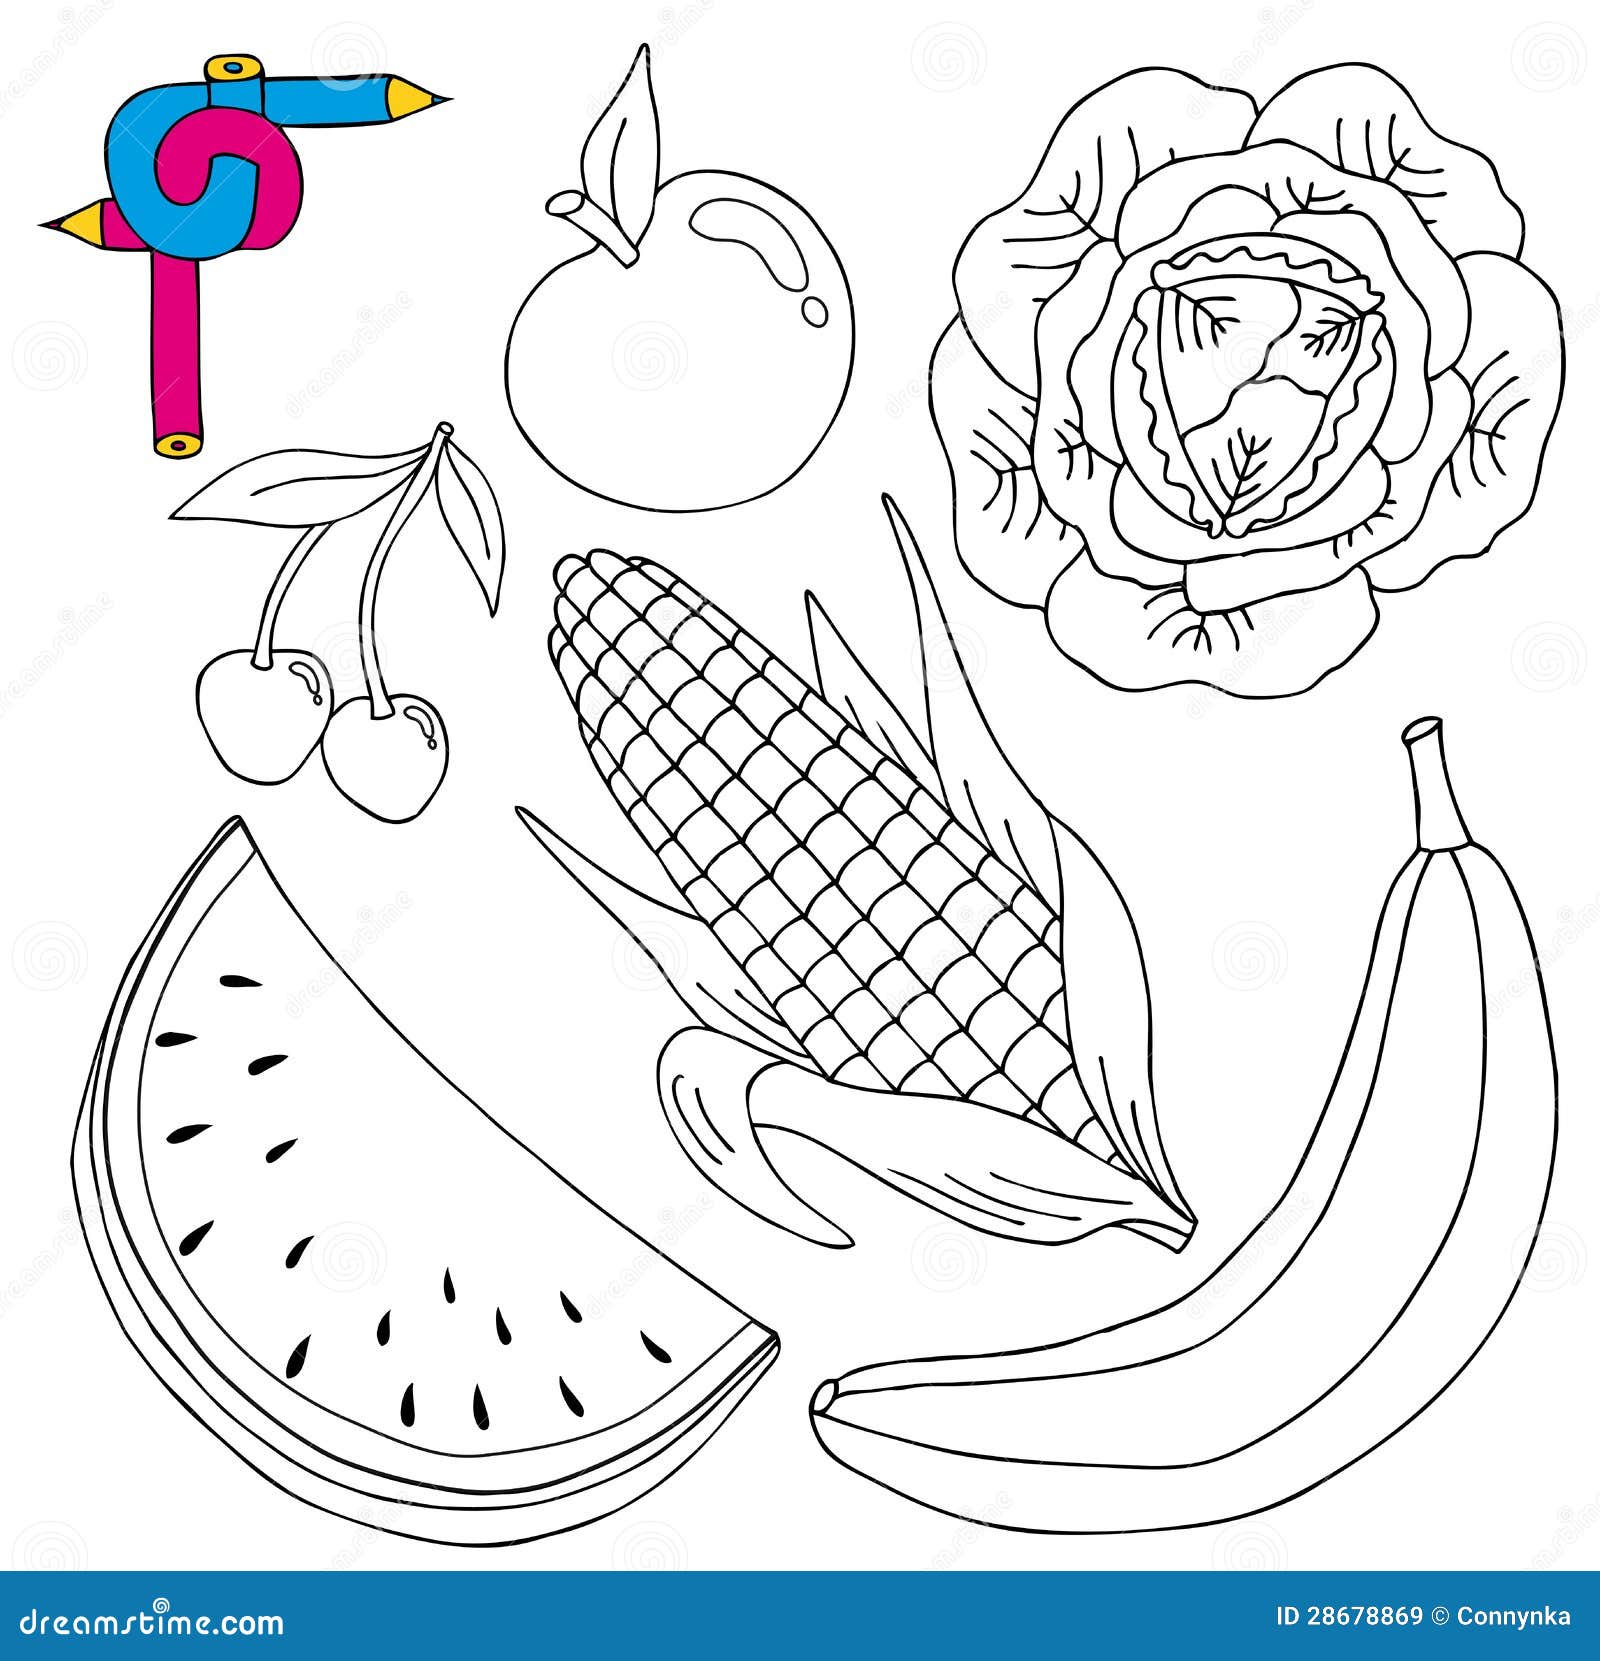 Coloring Image Fresh Collection Stock Vector - Image: 28678869